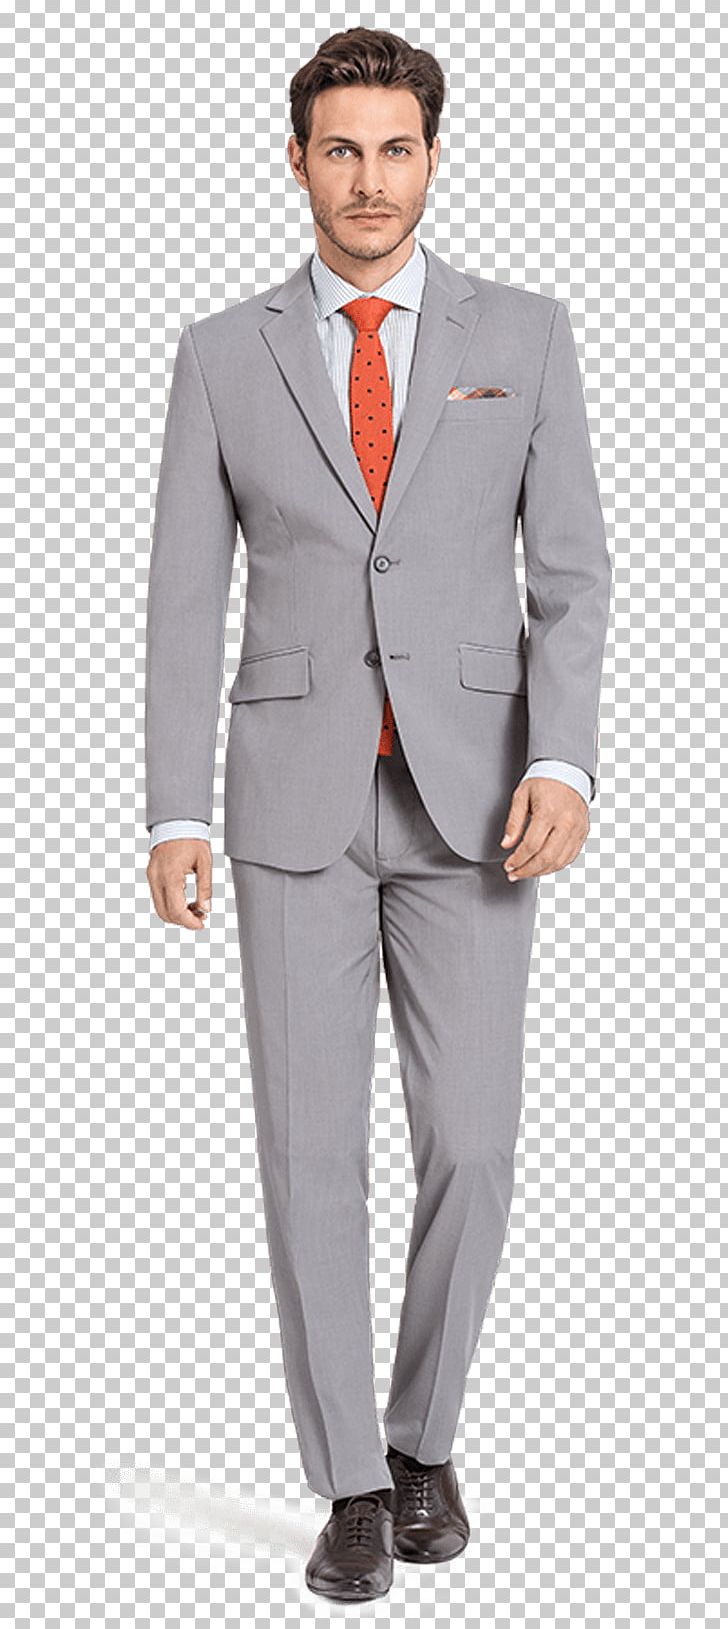 Tuxedo Suit Blazer Shirt Jacket PNG, Clipart, Blazer, Business, Businessperson, Clothing, Costume Free PNG Download